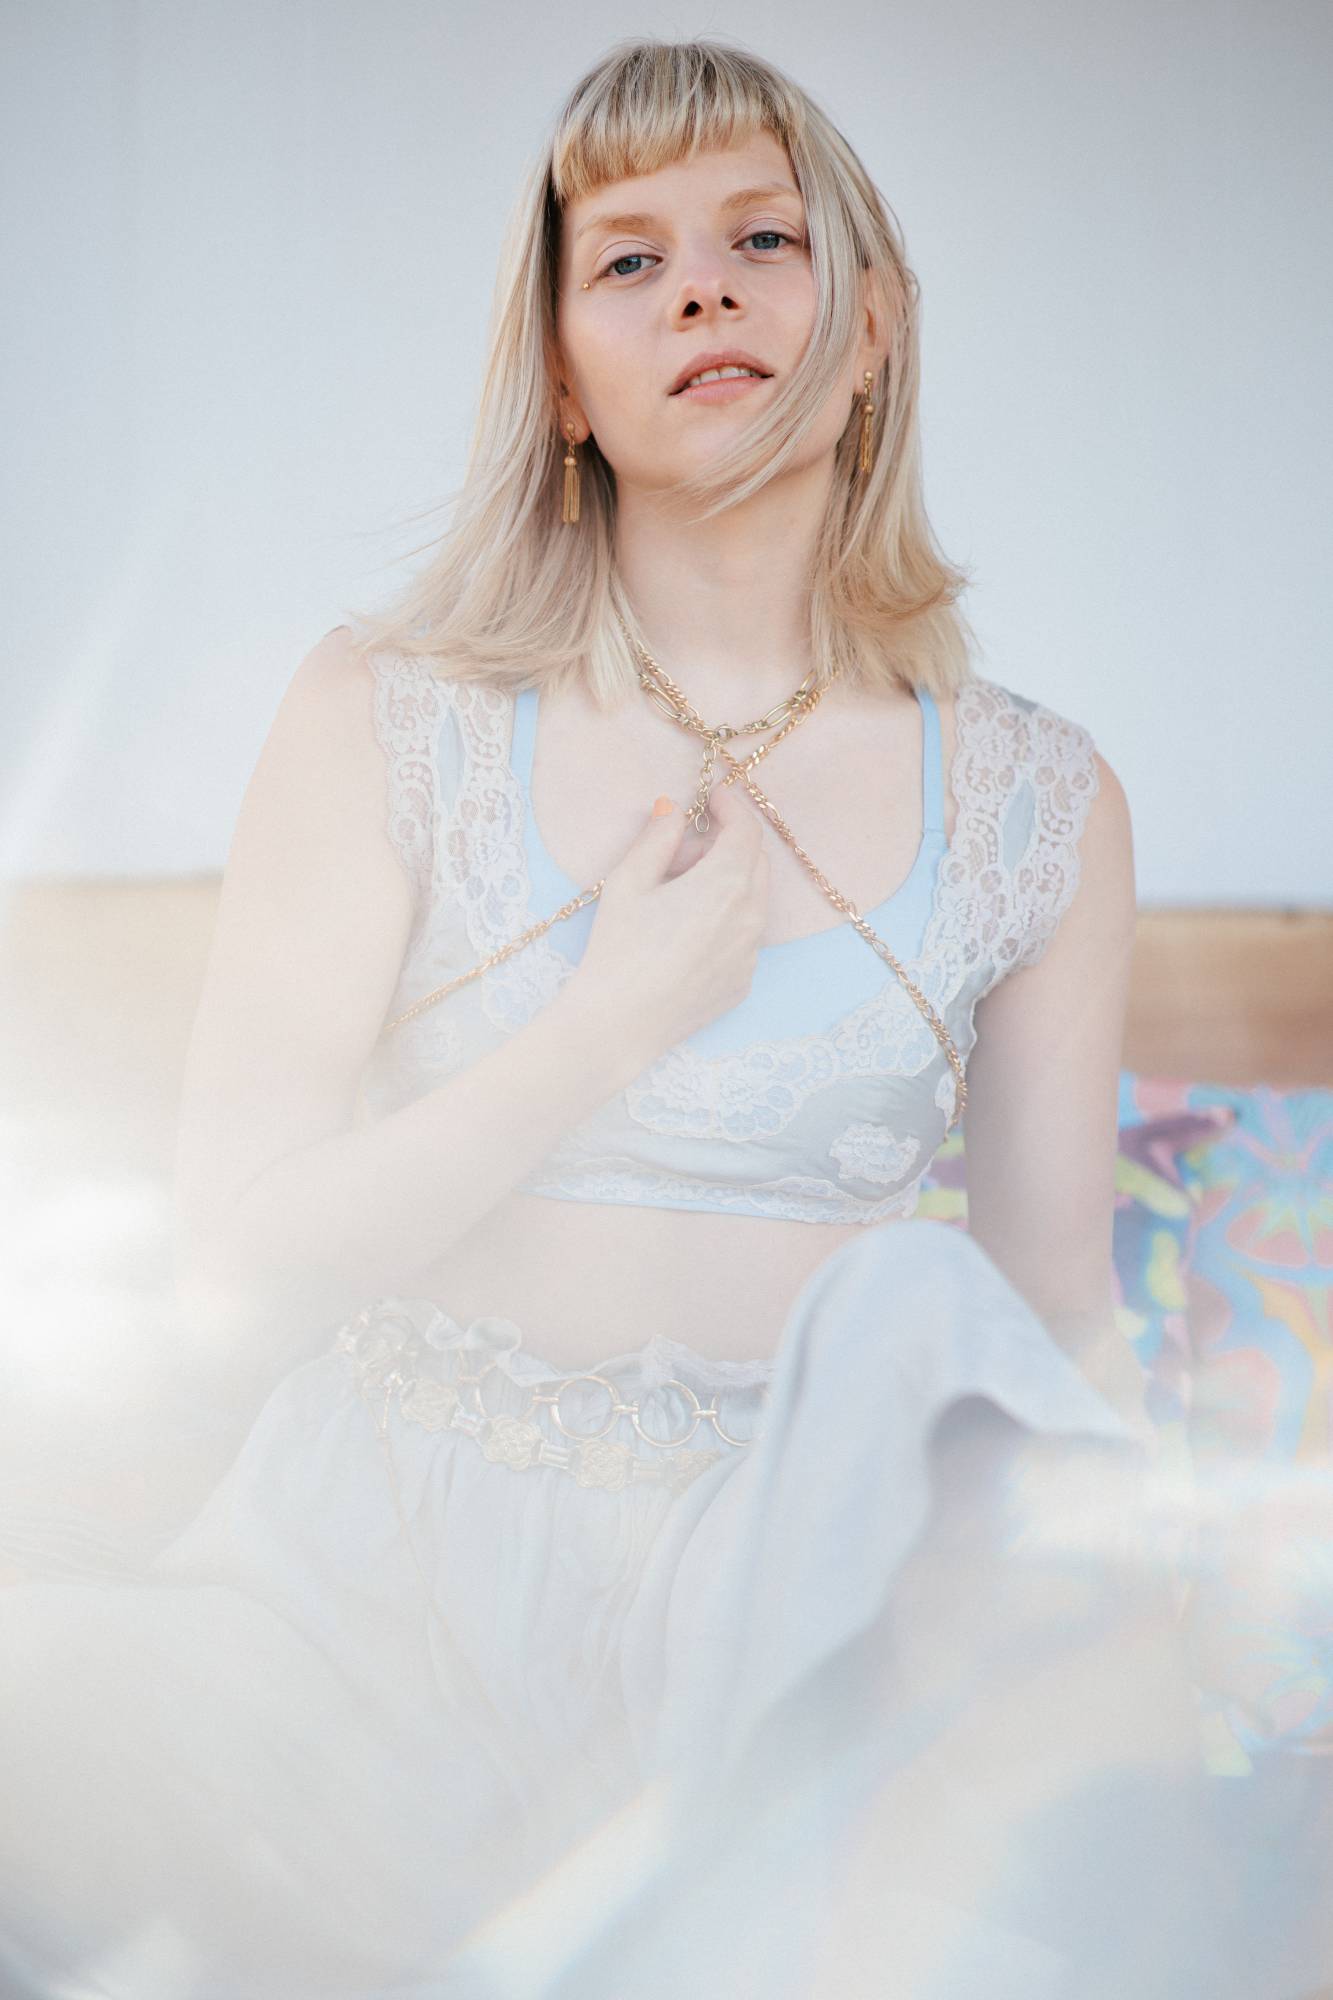 AURORA backstage at Glastonbury 2024. Credit: Andy Ford for NME